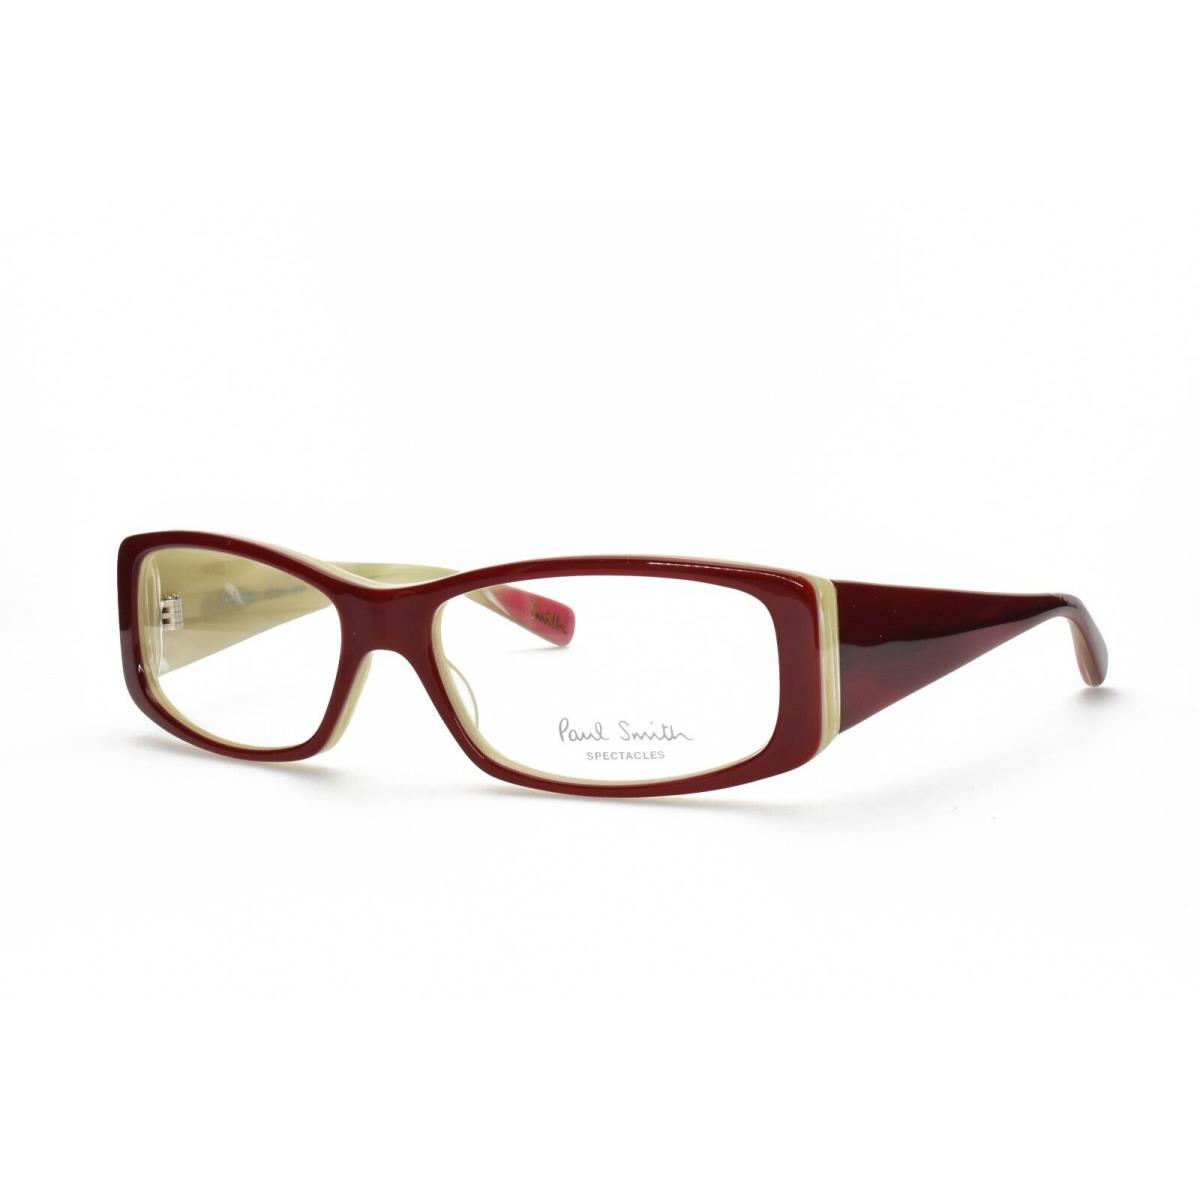 Paul Smith PS 416 Rual Eyeglasses Frames Only 53-15-130